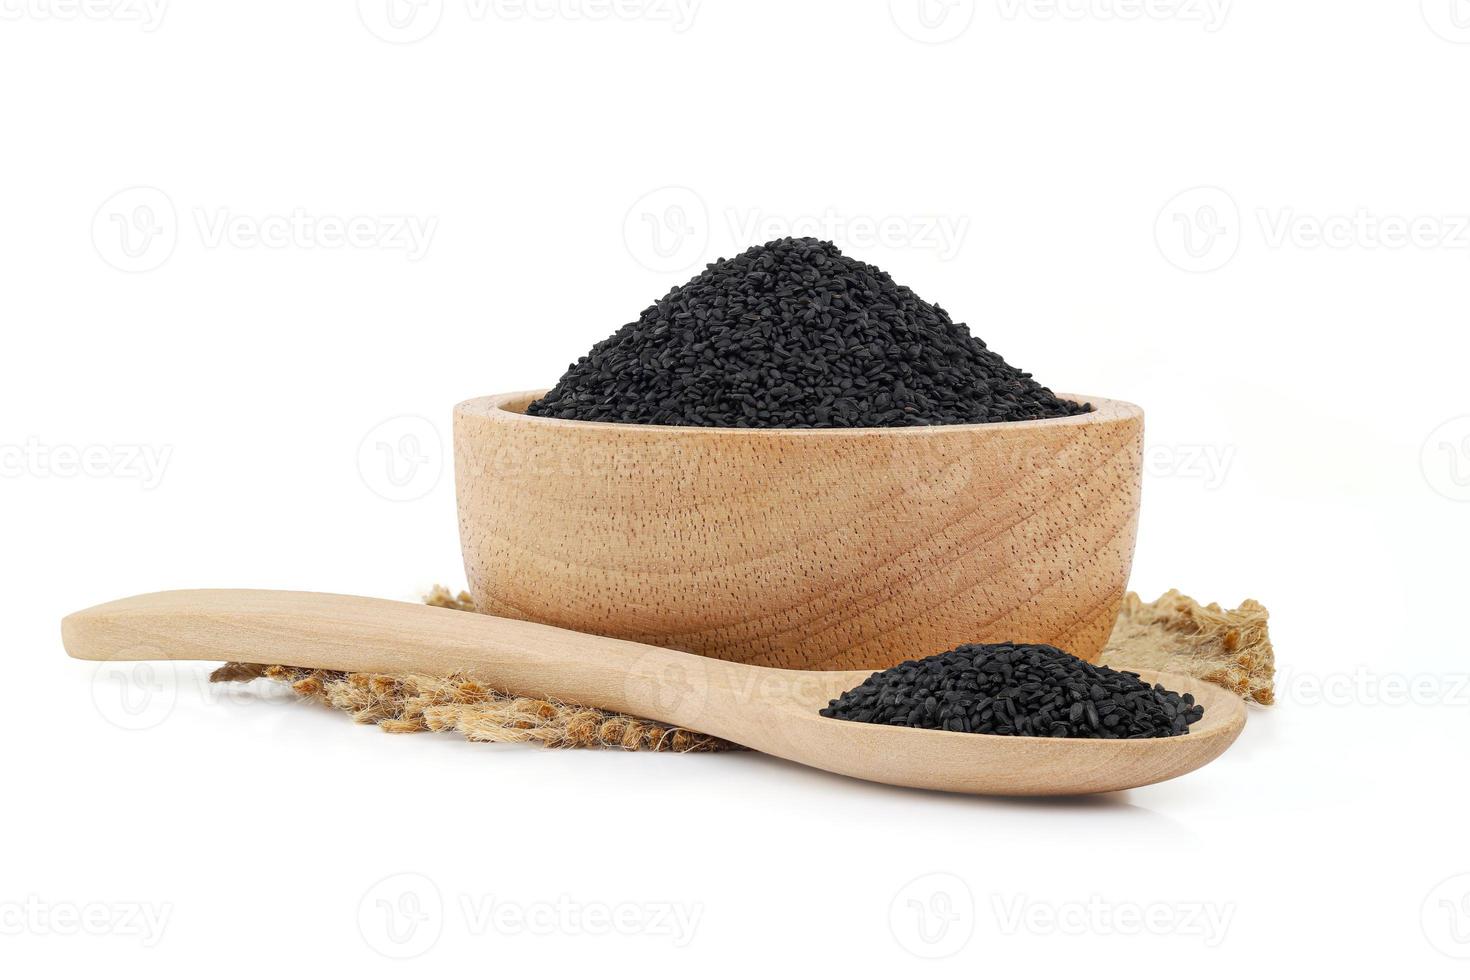 Black sesame in wooden bowl and spoon on burlap on white background photo